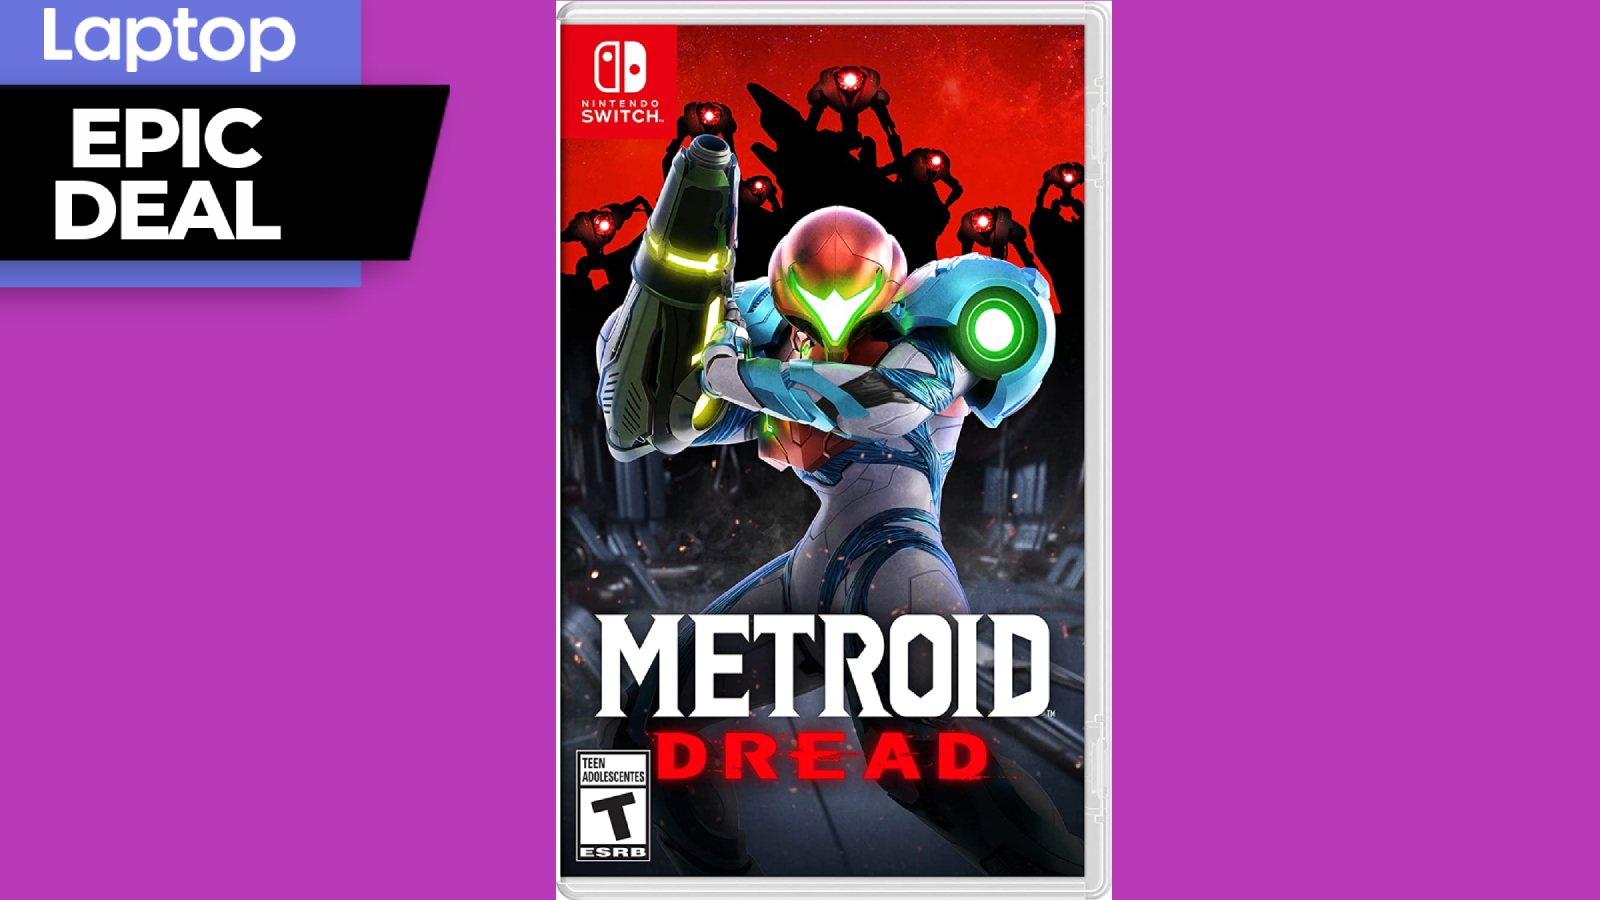 Save $20 on Metroid Dread for Nintendo Switch